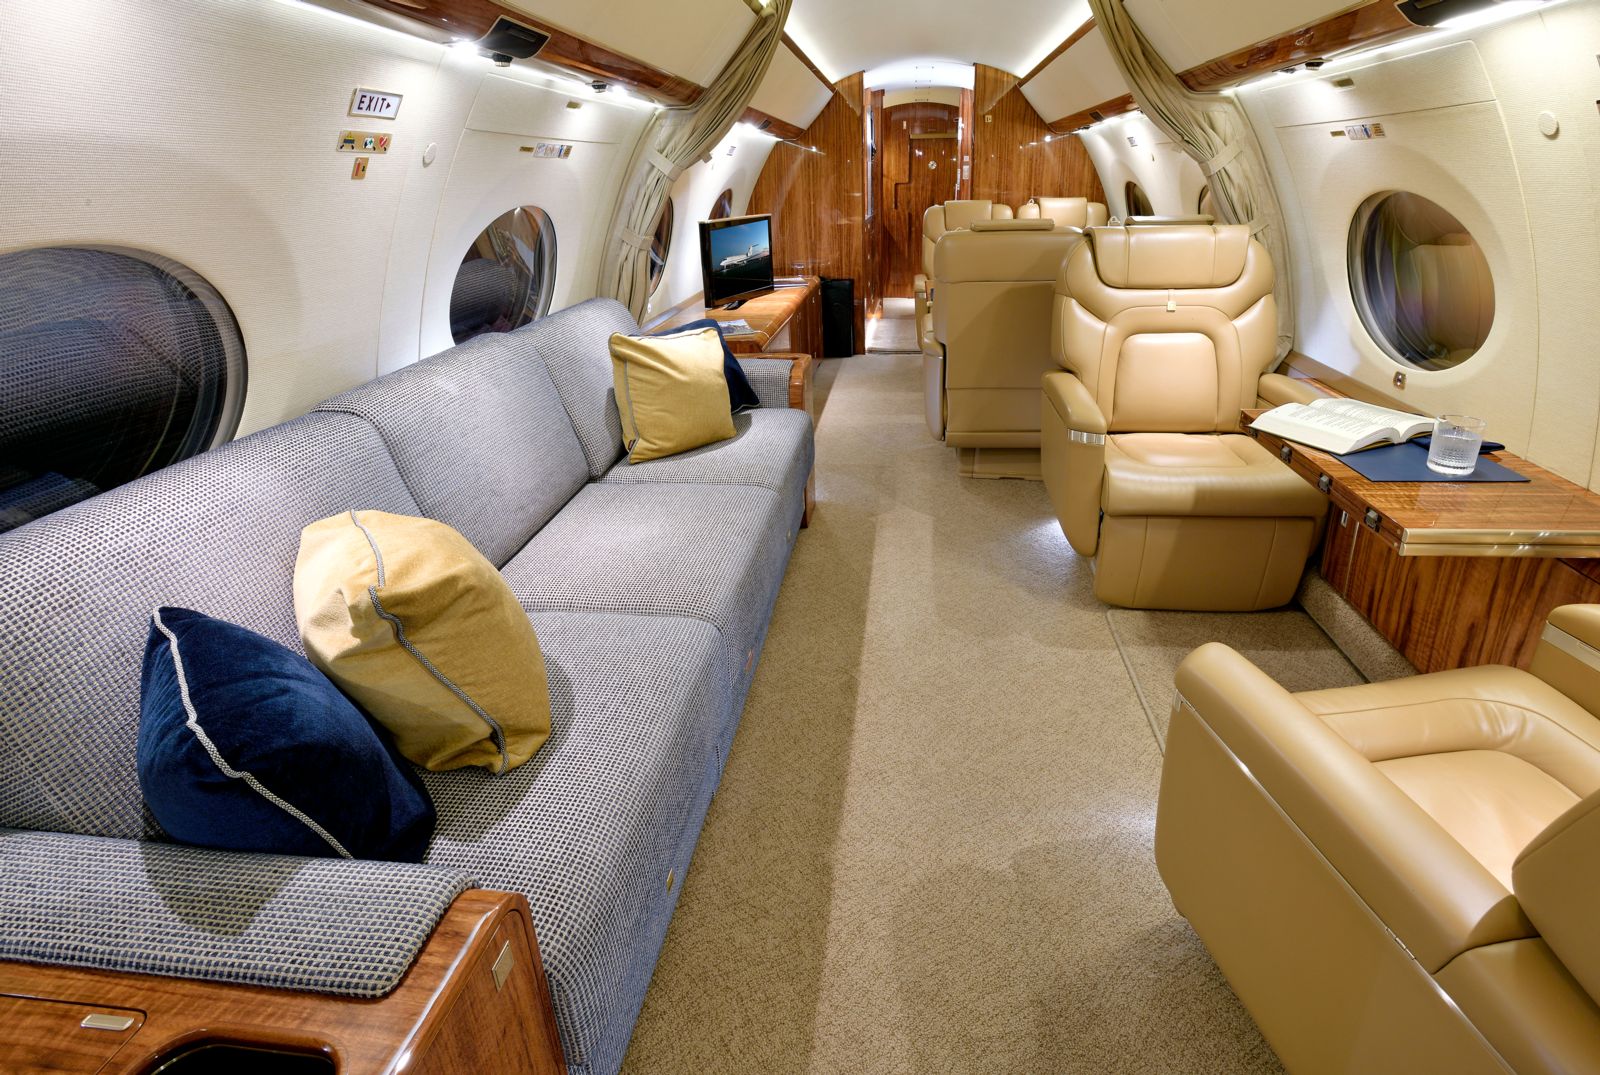 Gulfstream G650ER  S/N 6012 for sale | gallery image: /userfiles/images/G650_sn6012/mid%20afyt.jpg